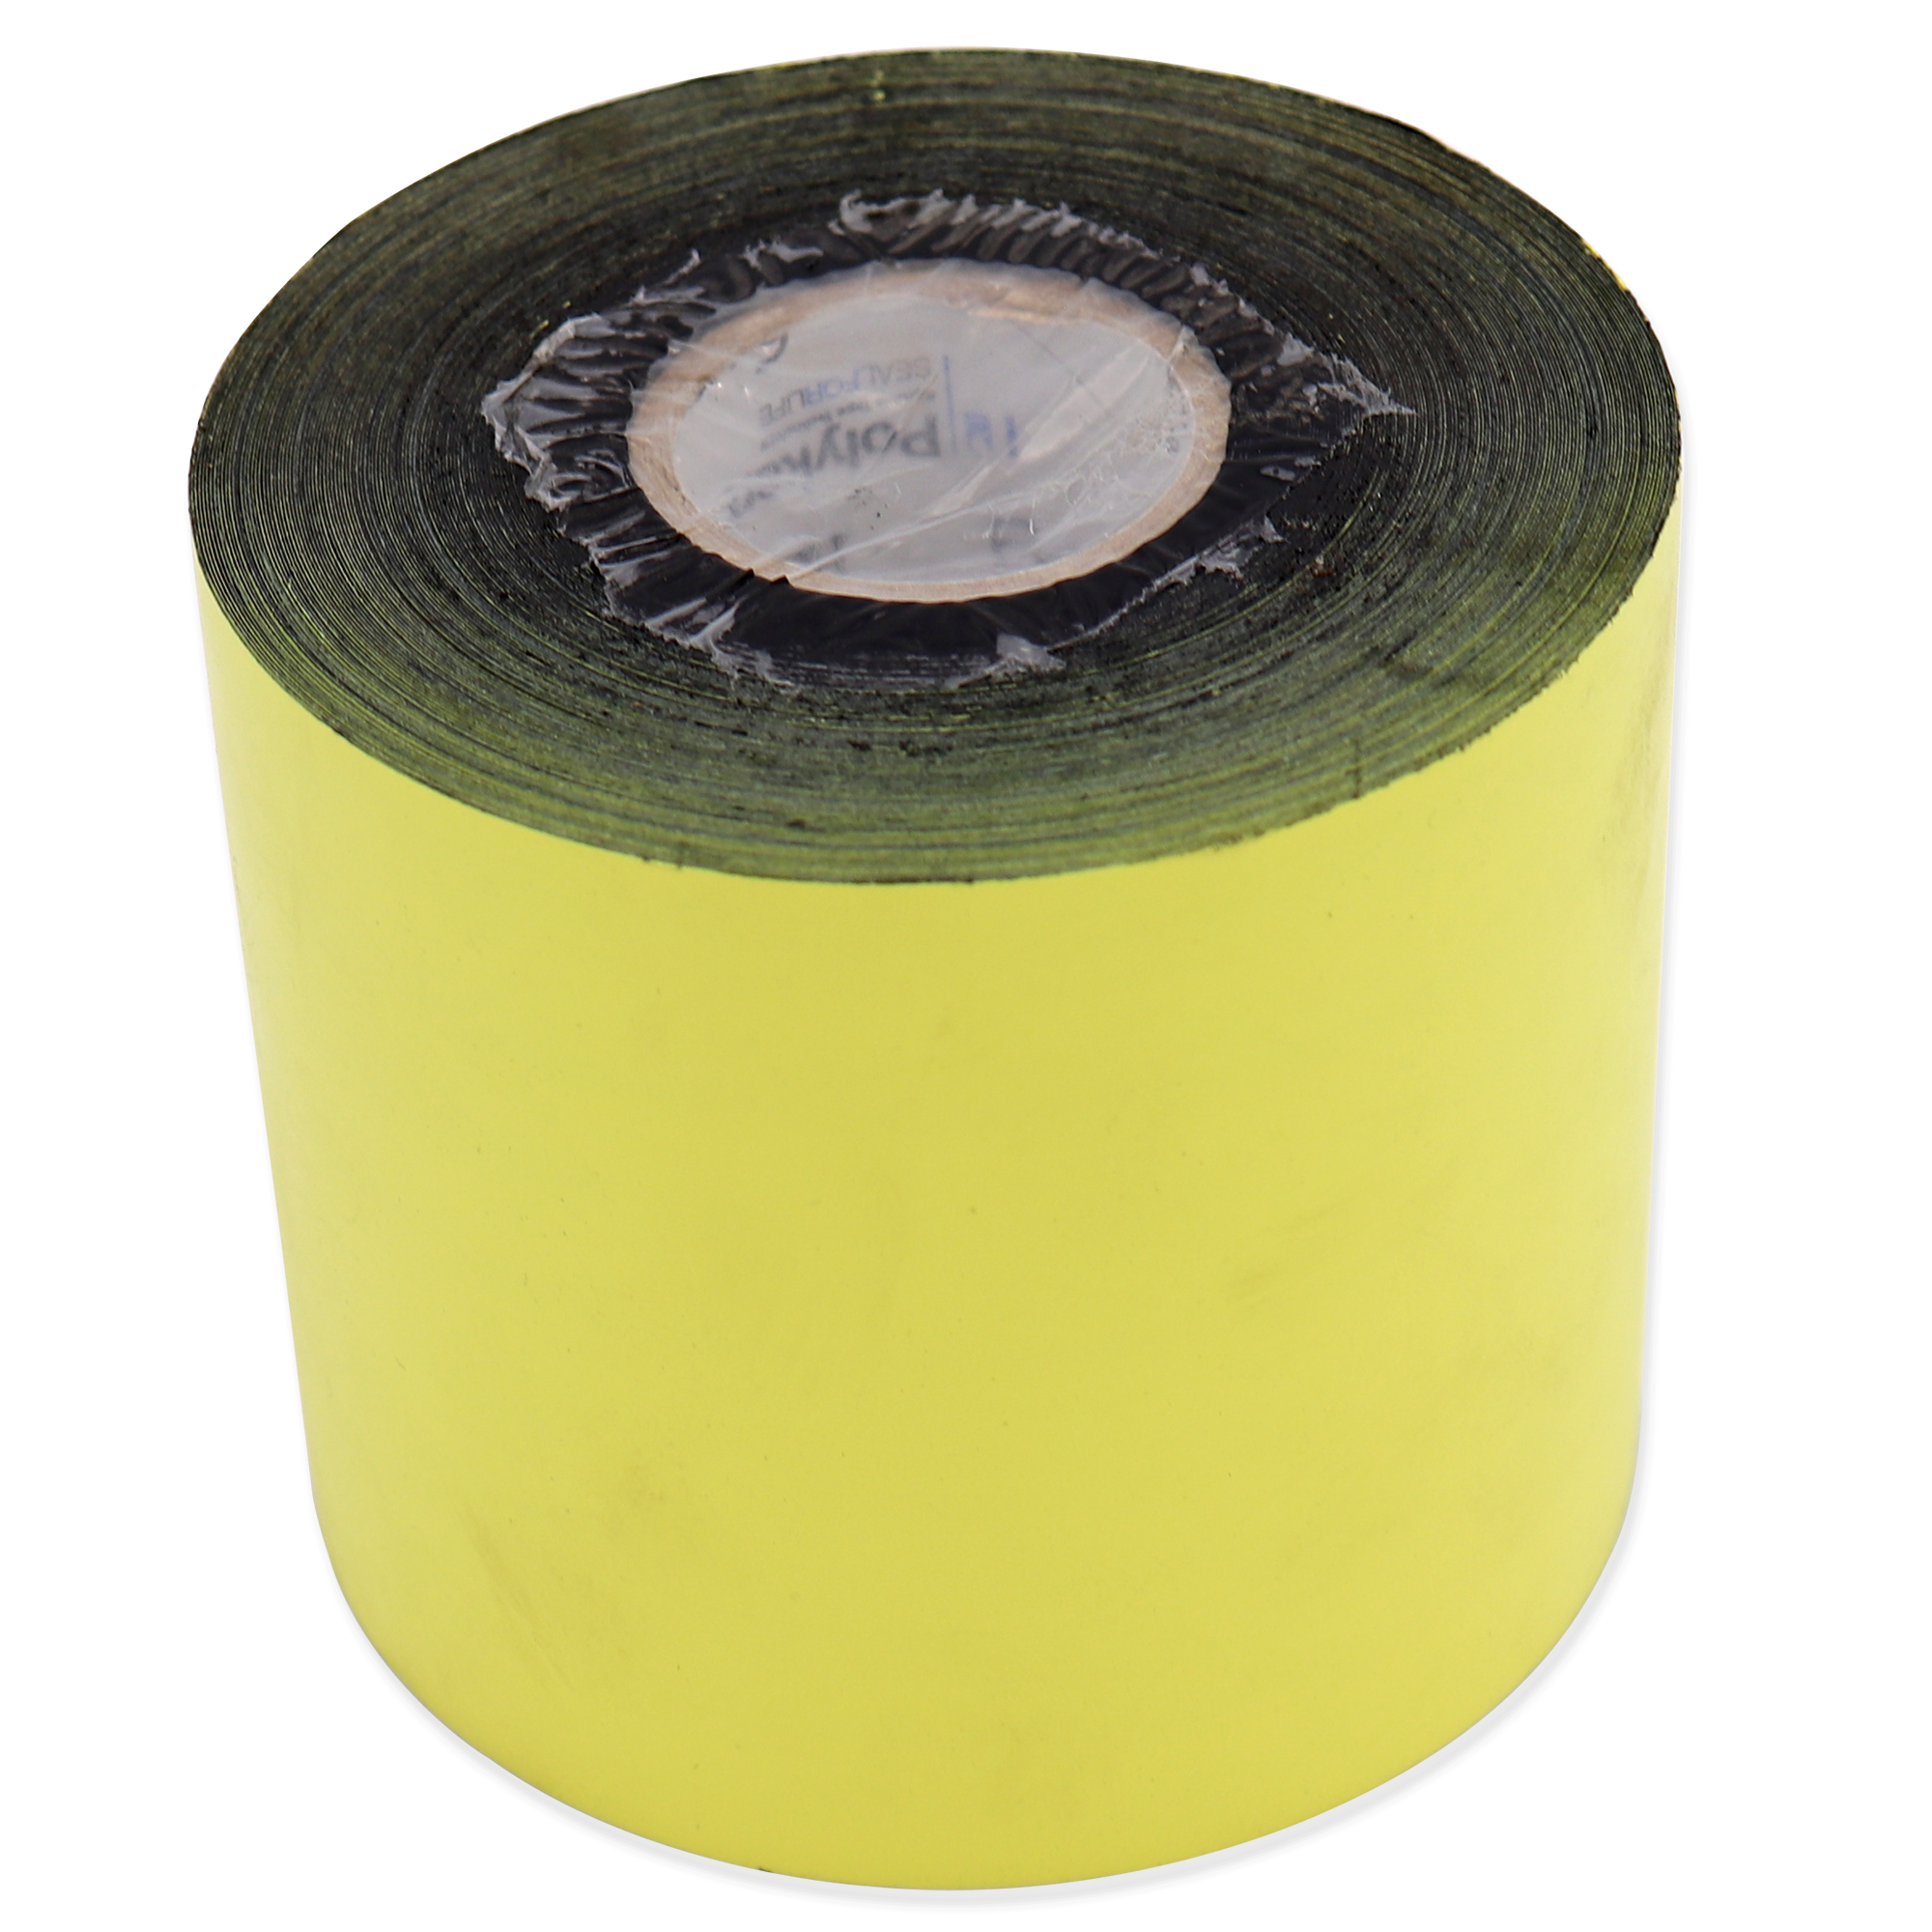 Flexible Measuring Tape stock image. Image of tape, textile - 2707441